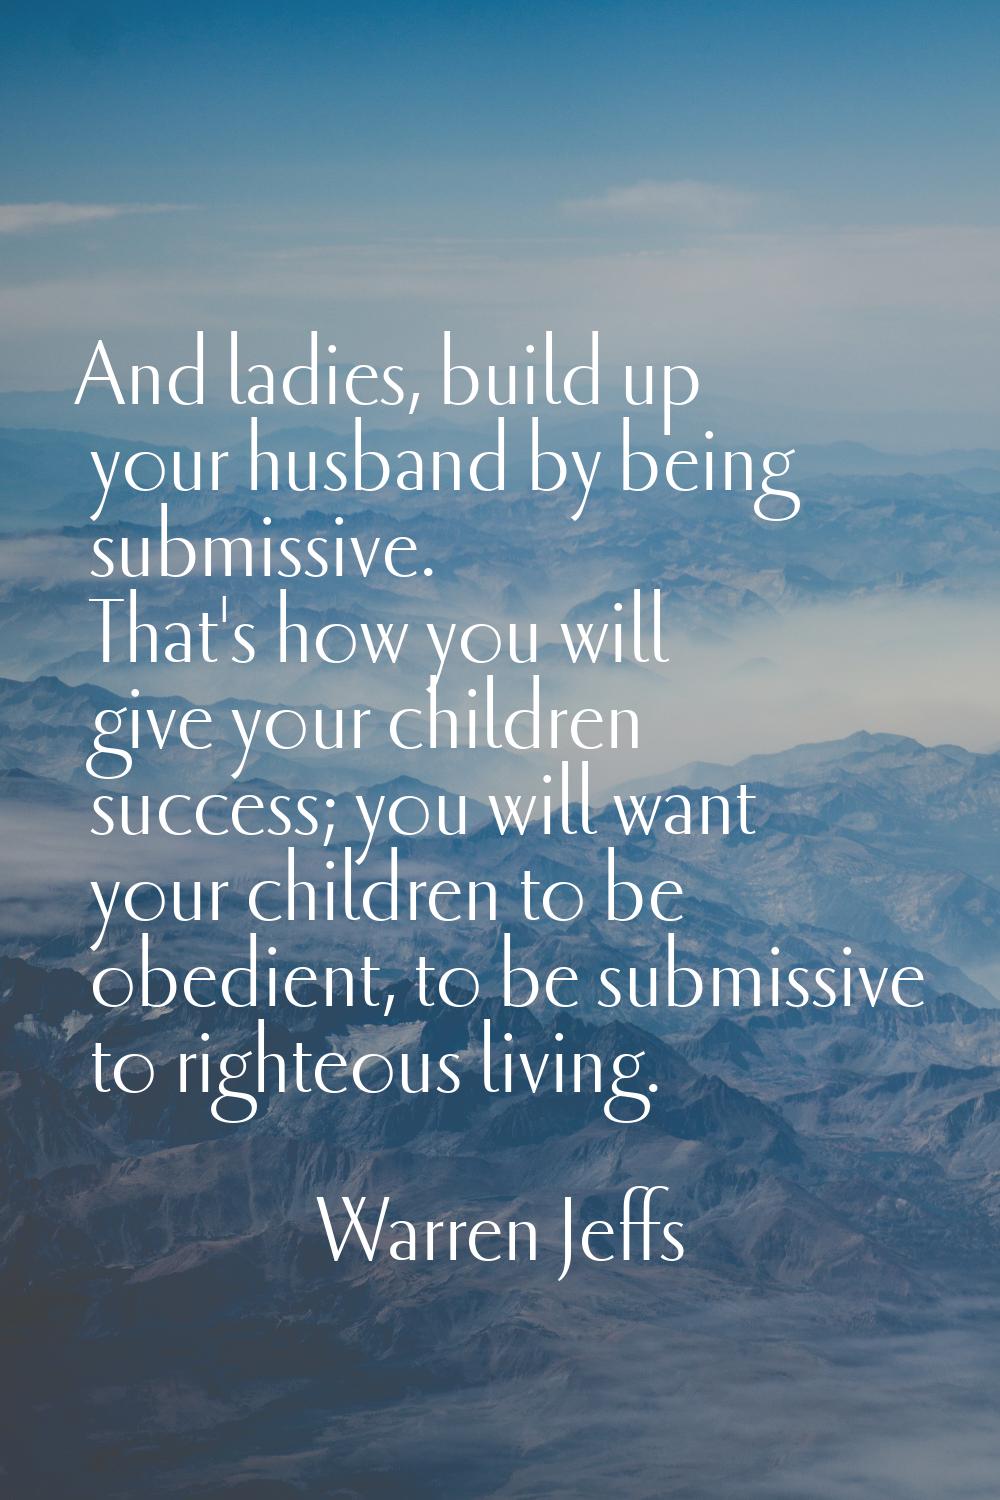 And ladies, build up your husband by being submissive. That's how you will give your children succe